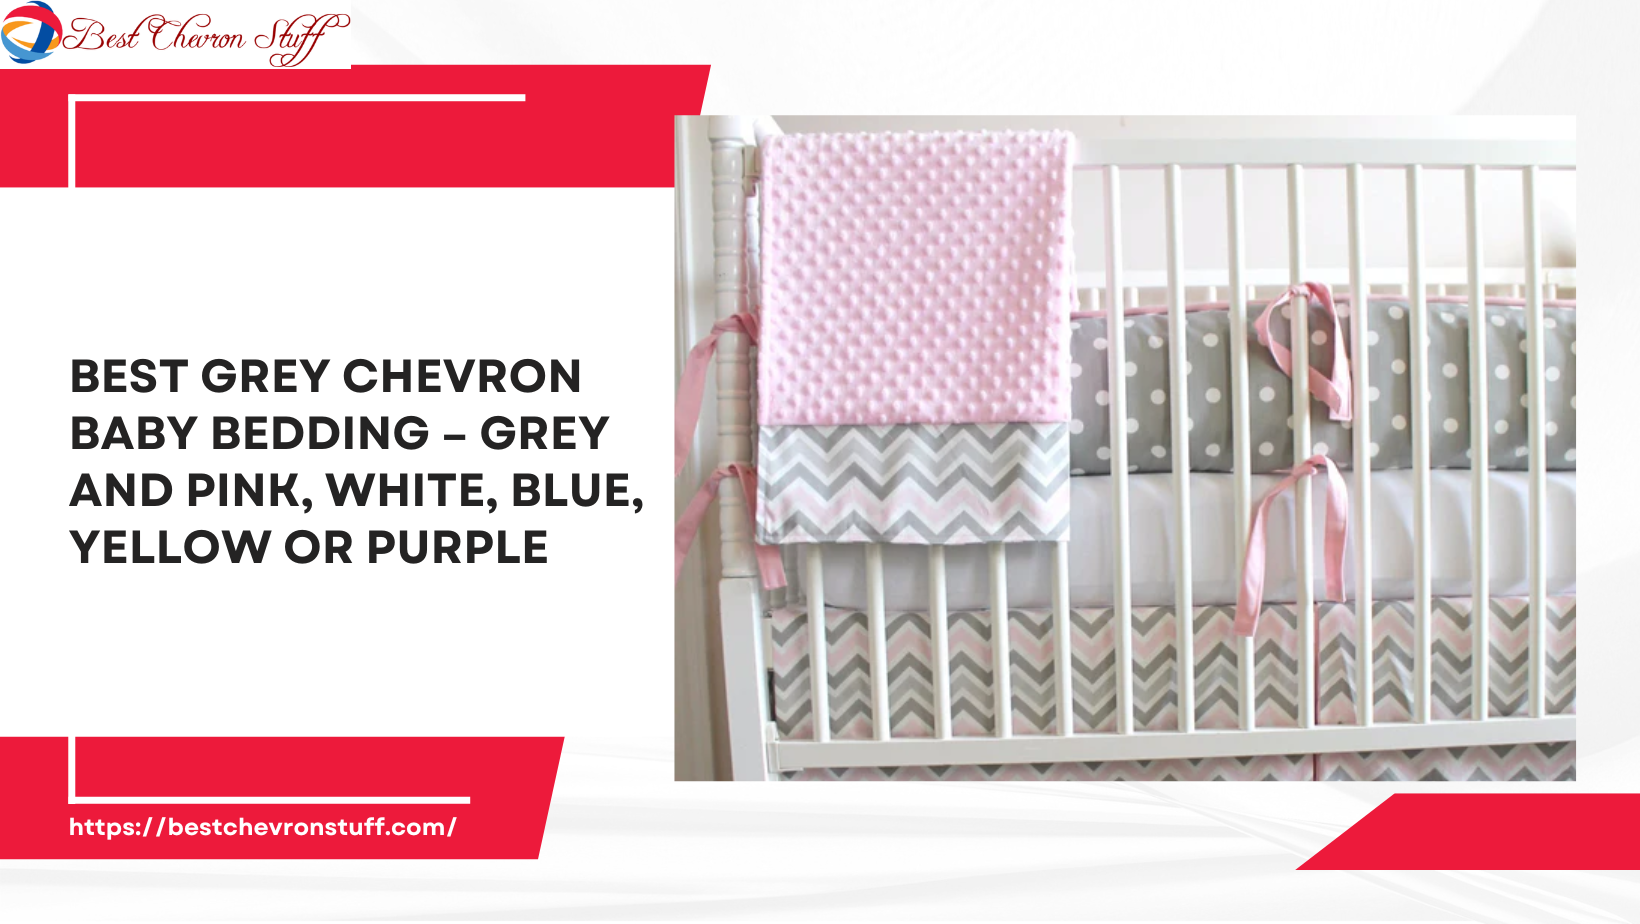 Best Grey Chevron Baby Bedding – Grey and Pink, White, Blue, Yellow or Purple